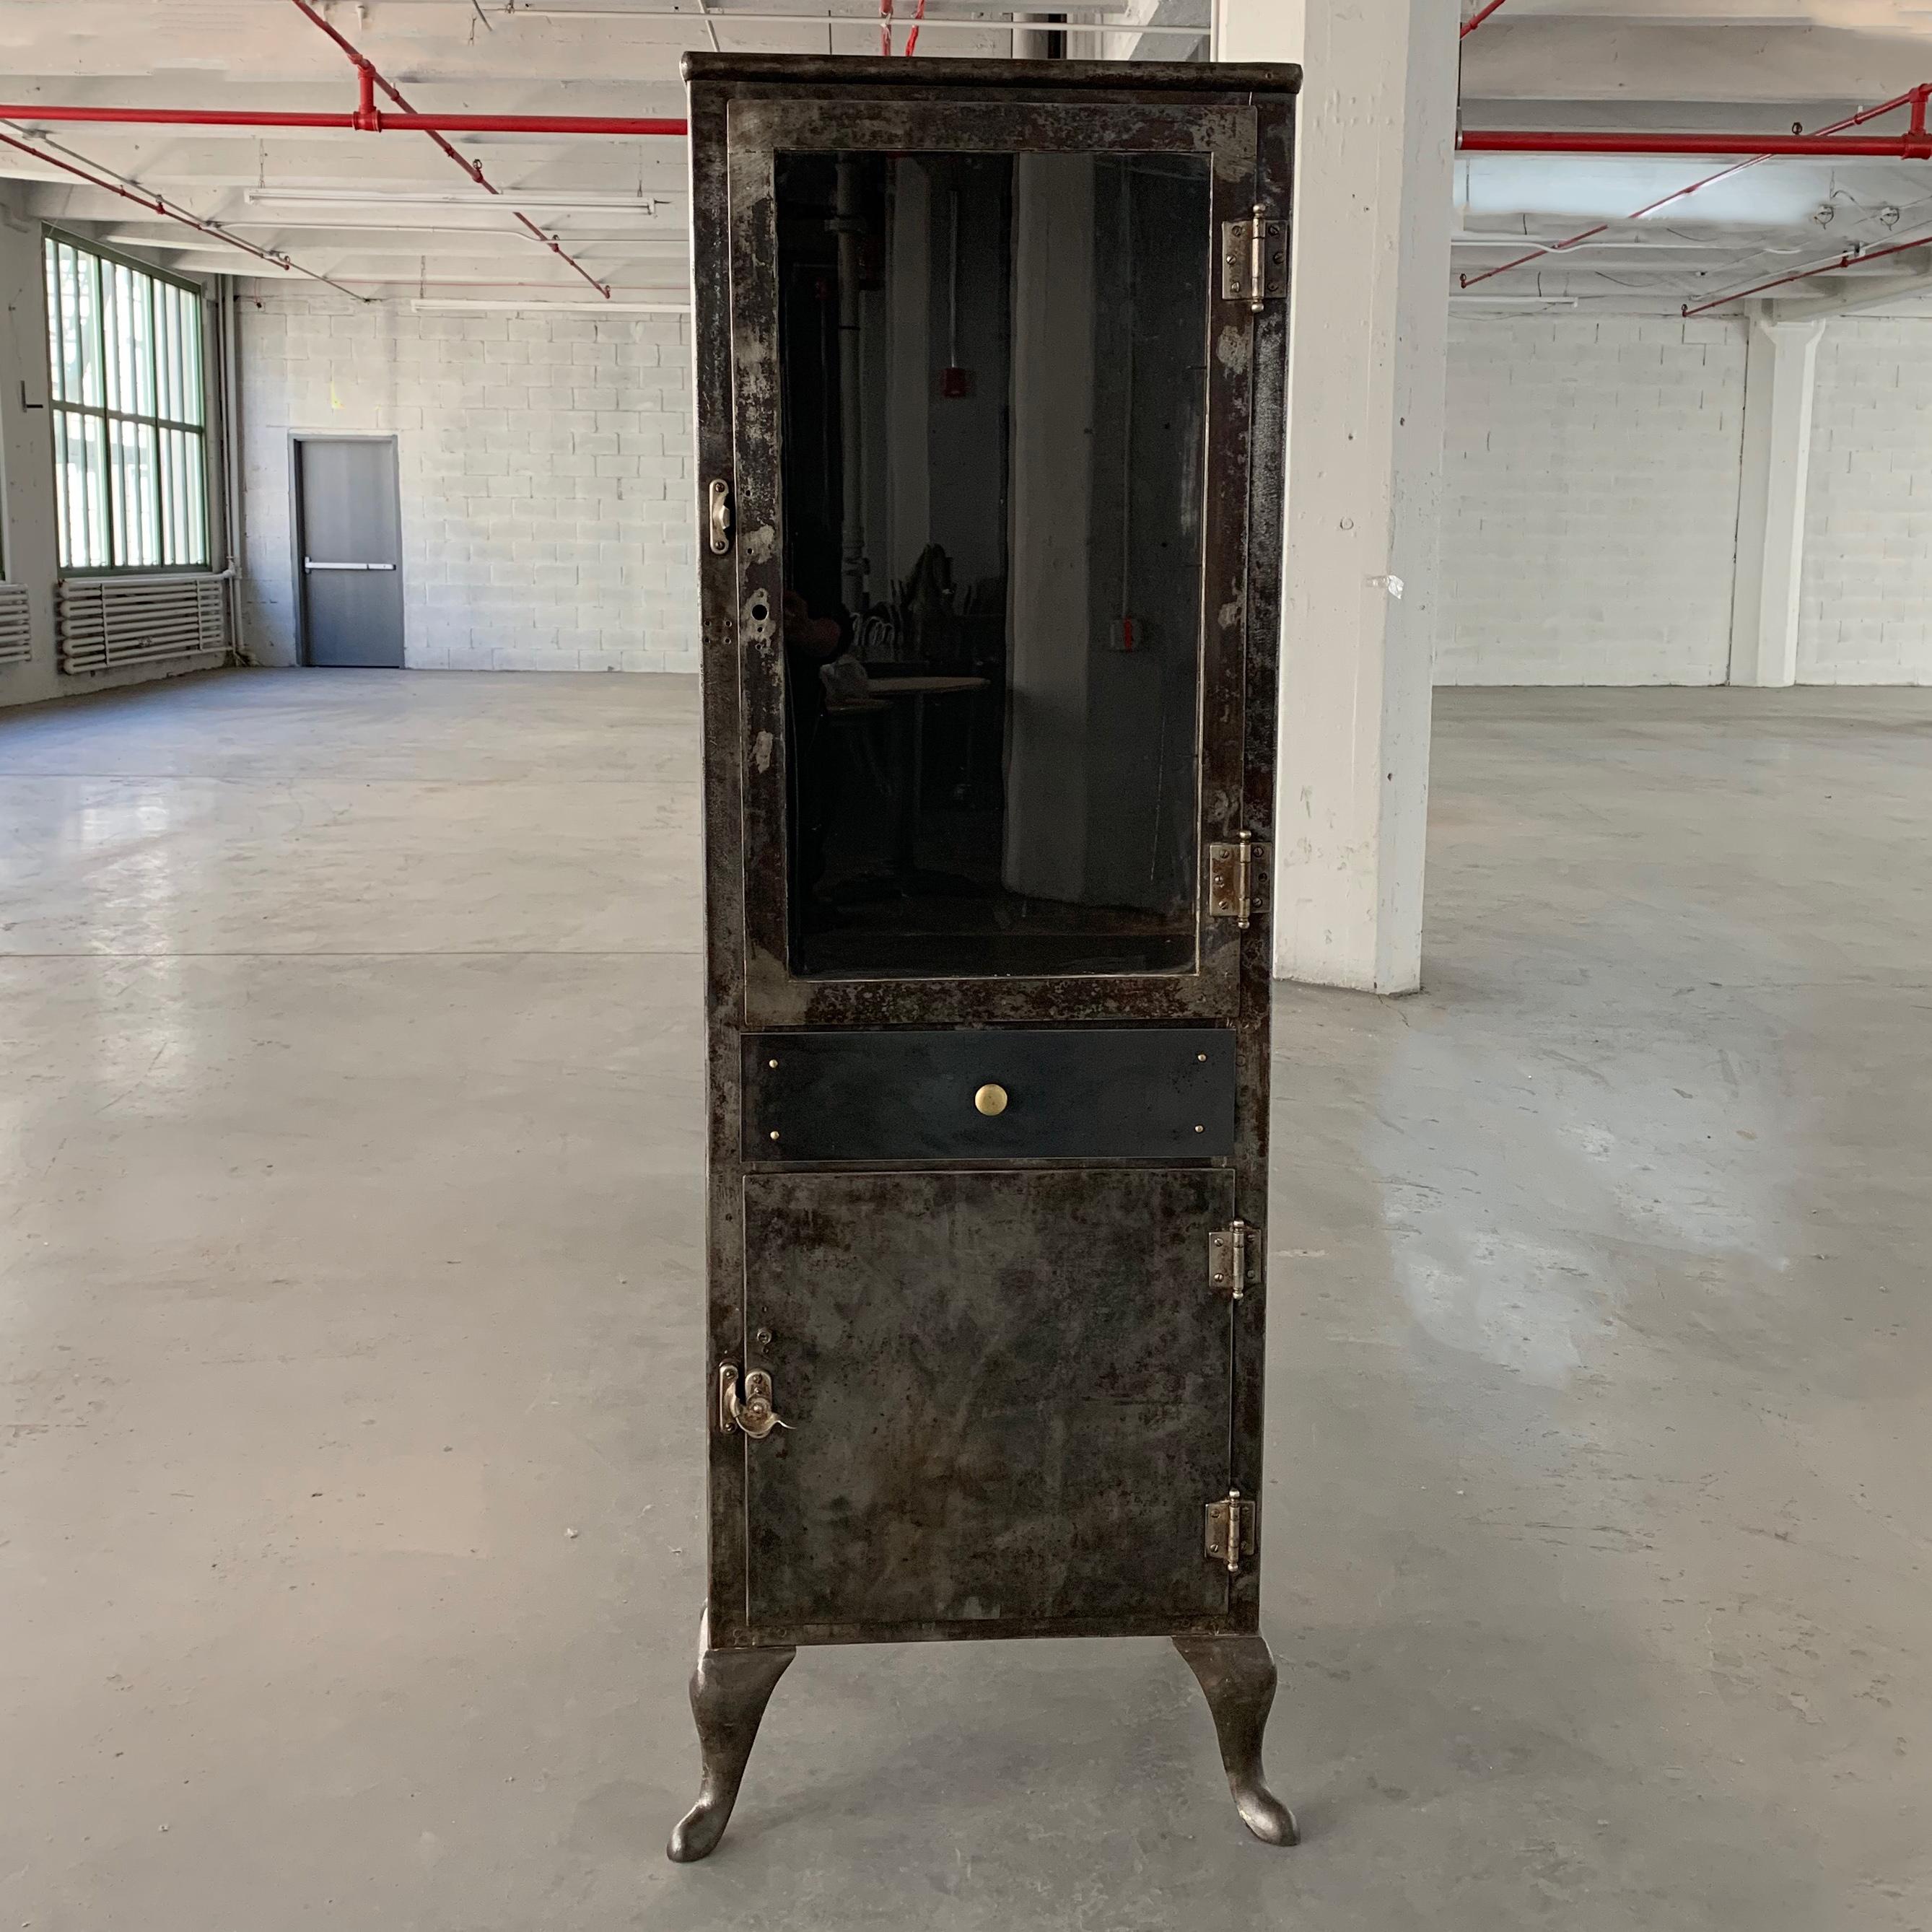 Early 20th century, industrial, brushed steel, apothecary cabinet features glass front, display on top that measures 31.5 inches height inside and closed storage below. 2 glass shelves are included for the top interior.